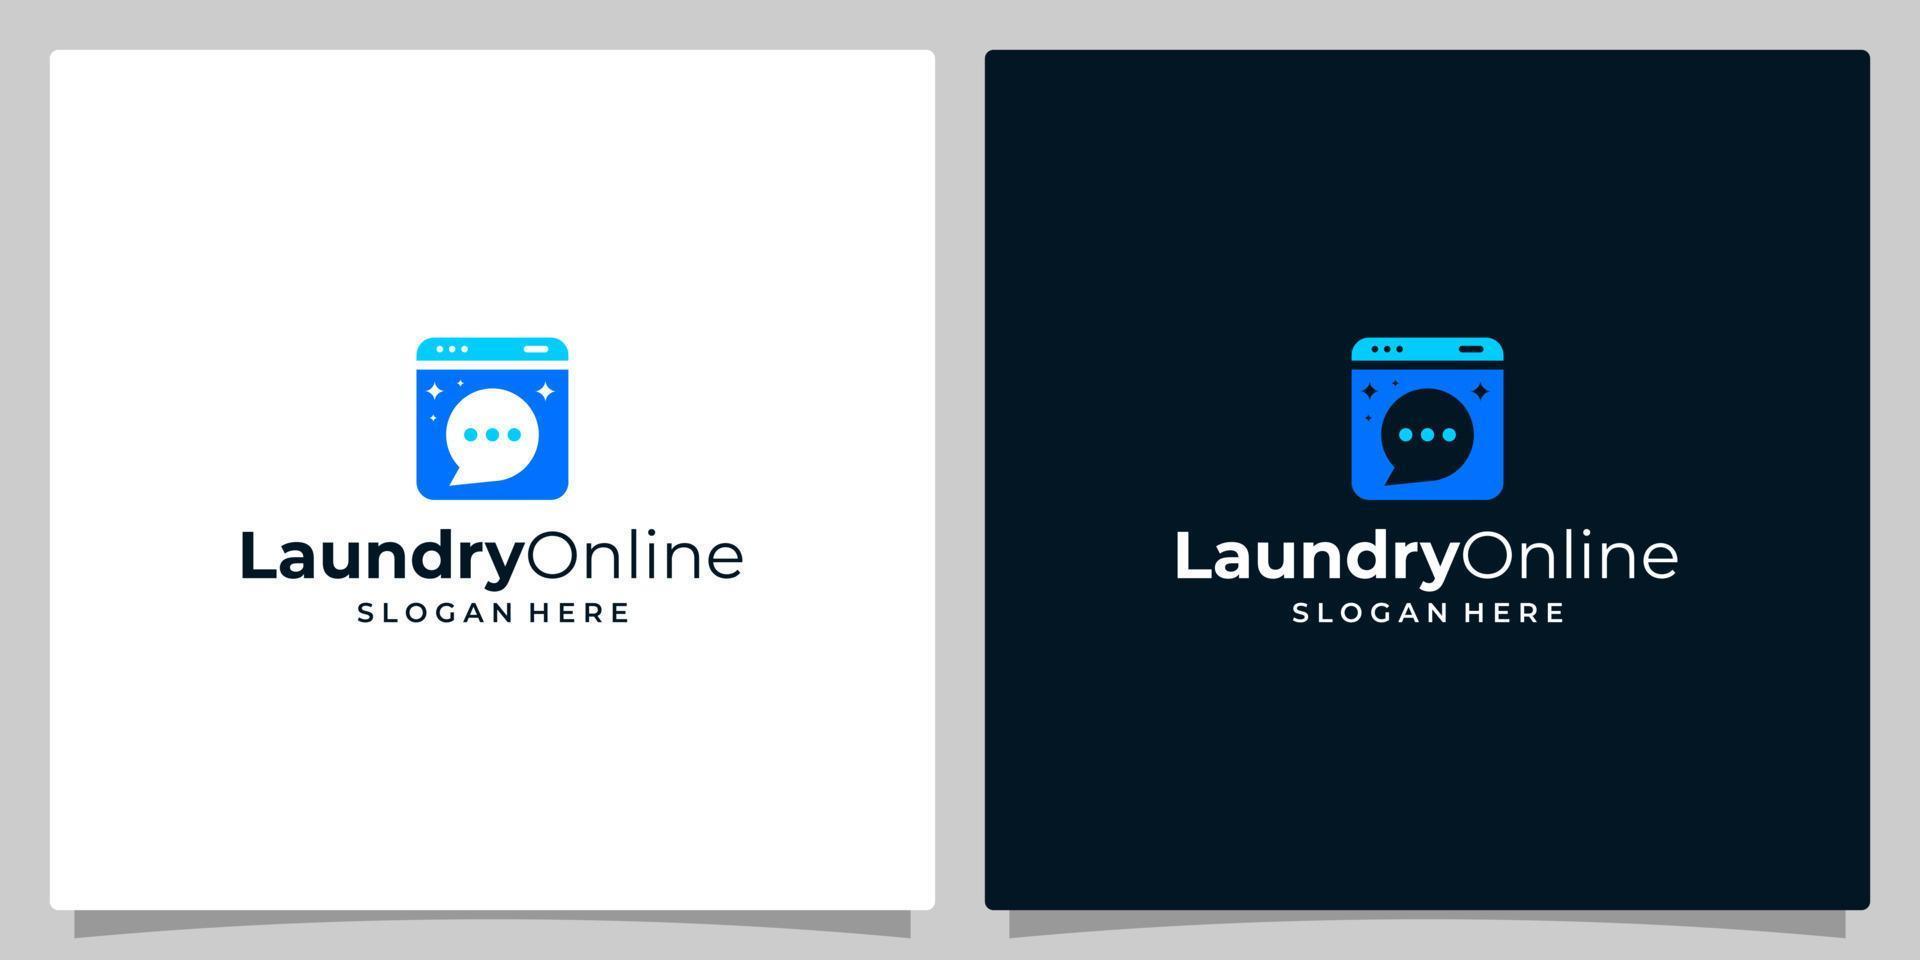 Washing machine laundry icon logo design with chat bubble. Modern vector logo design template design.